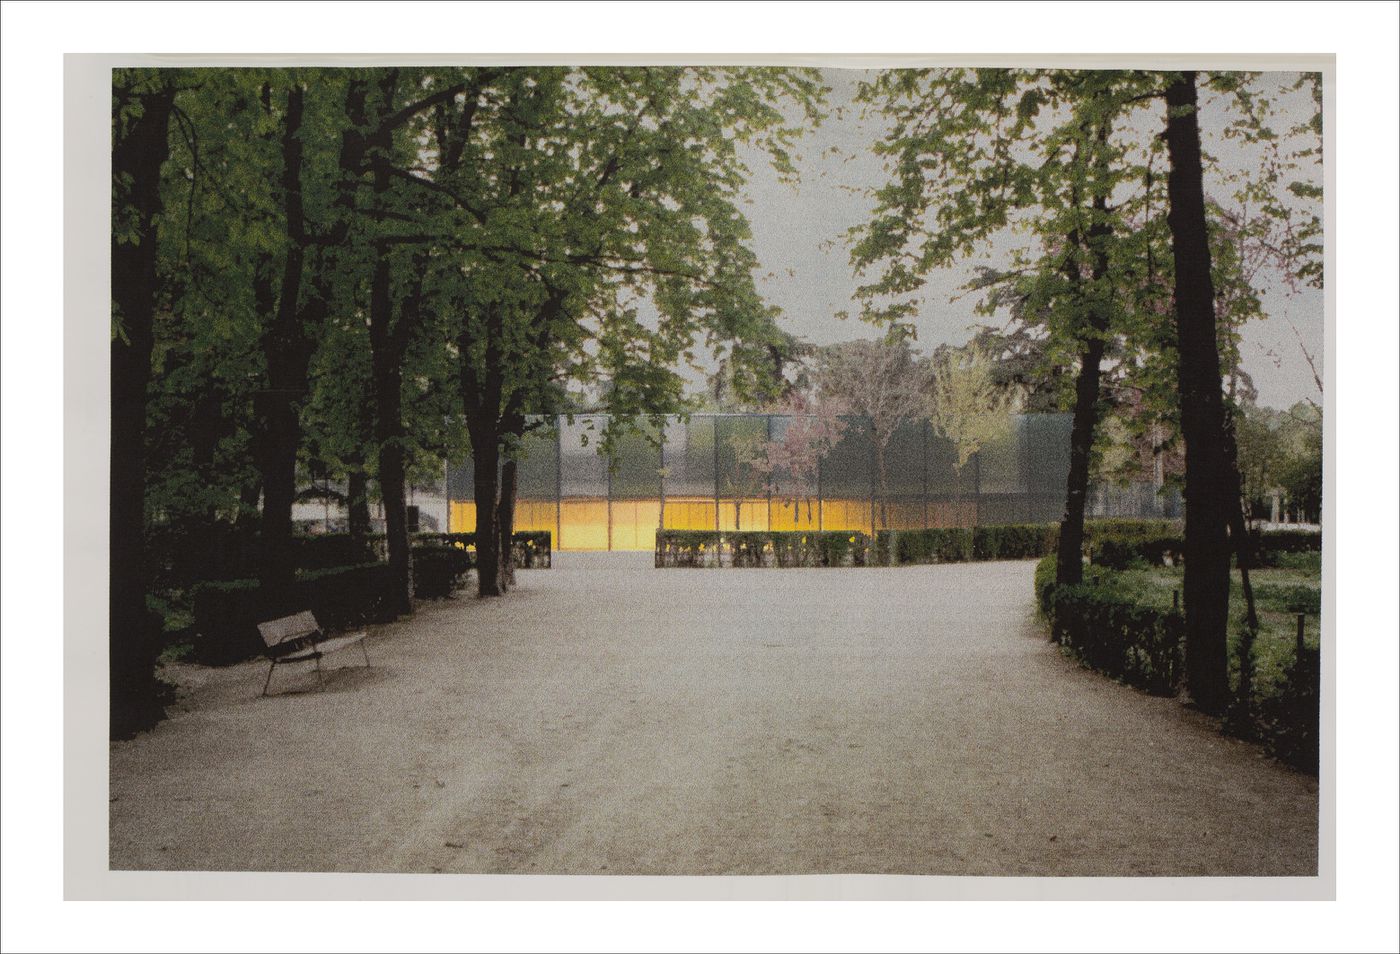 Proofs of Relevance: View of a photomontage showing the Retiro Park Gymnasium, Abalos & Herreros (1993-2003), Madrid, Spain